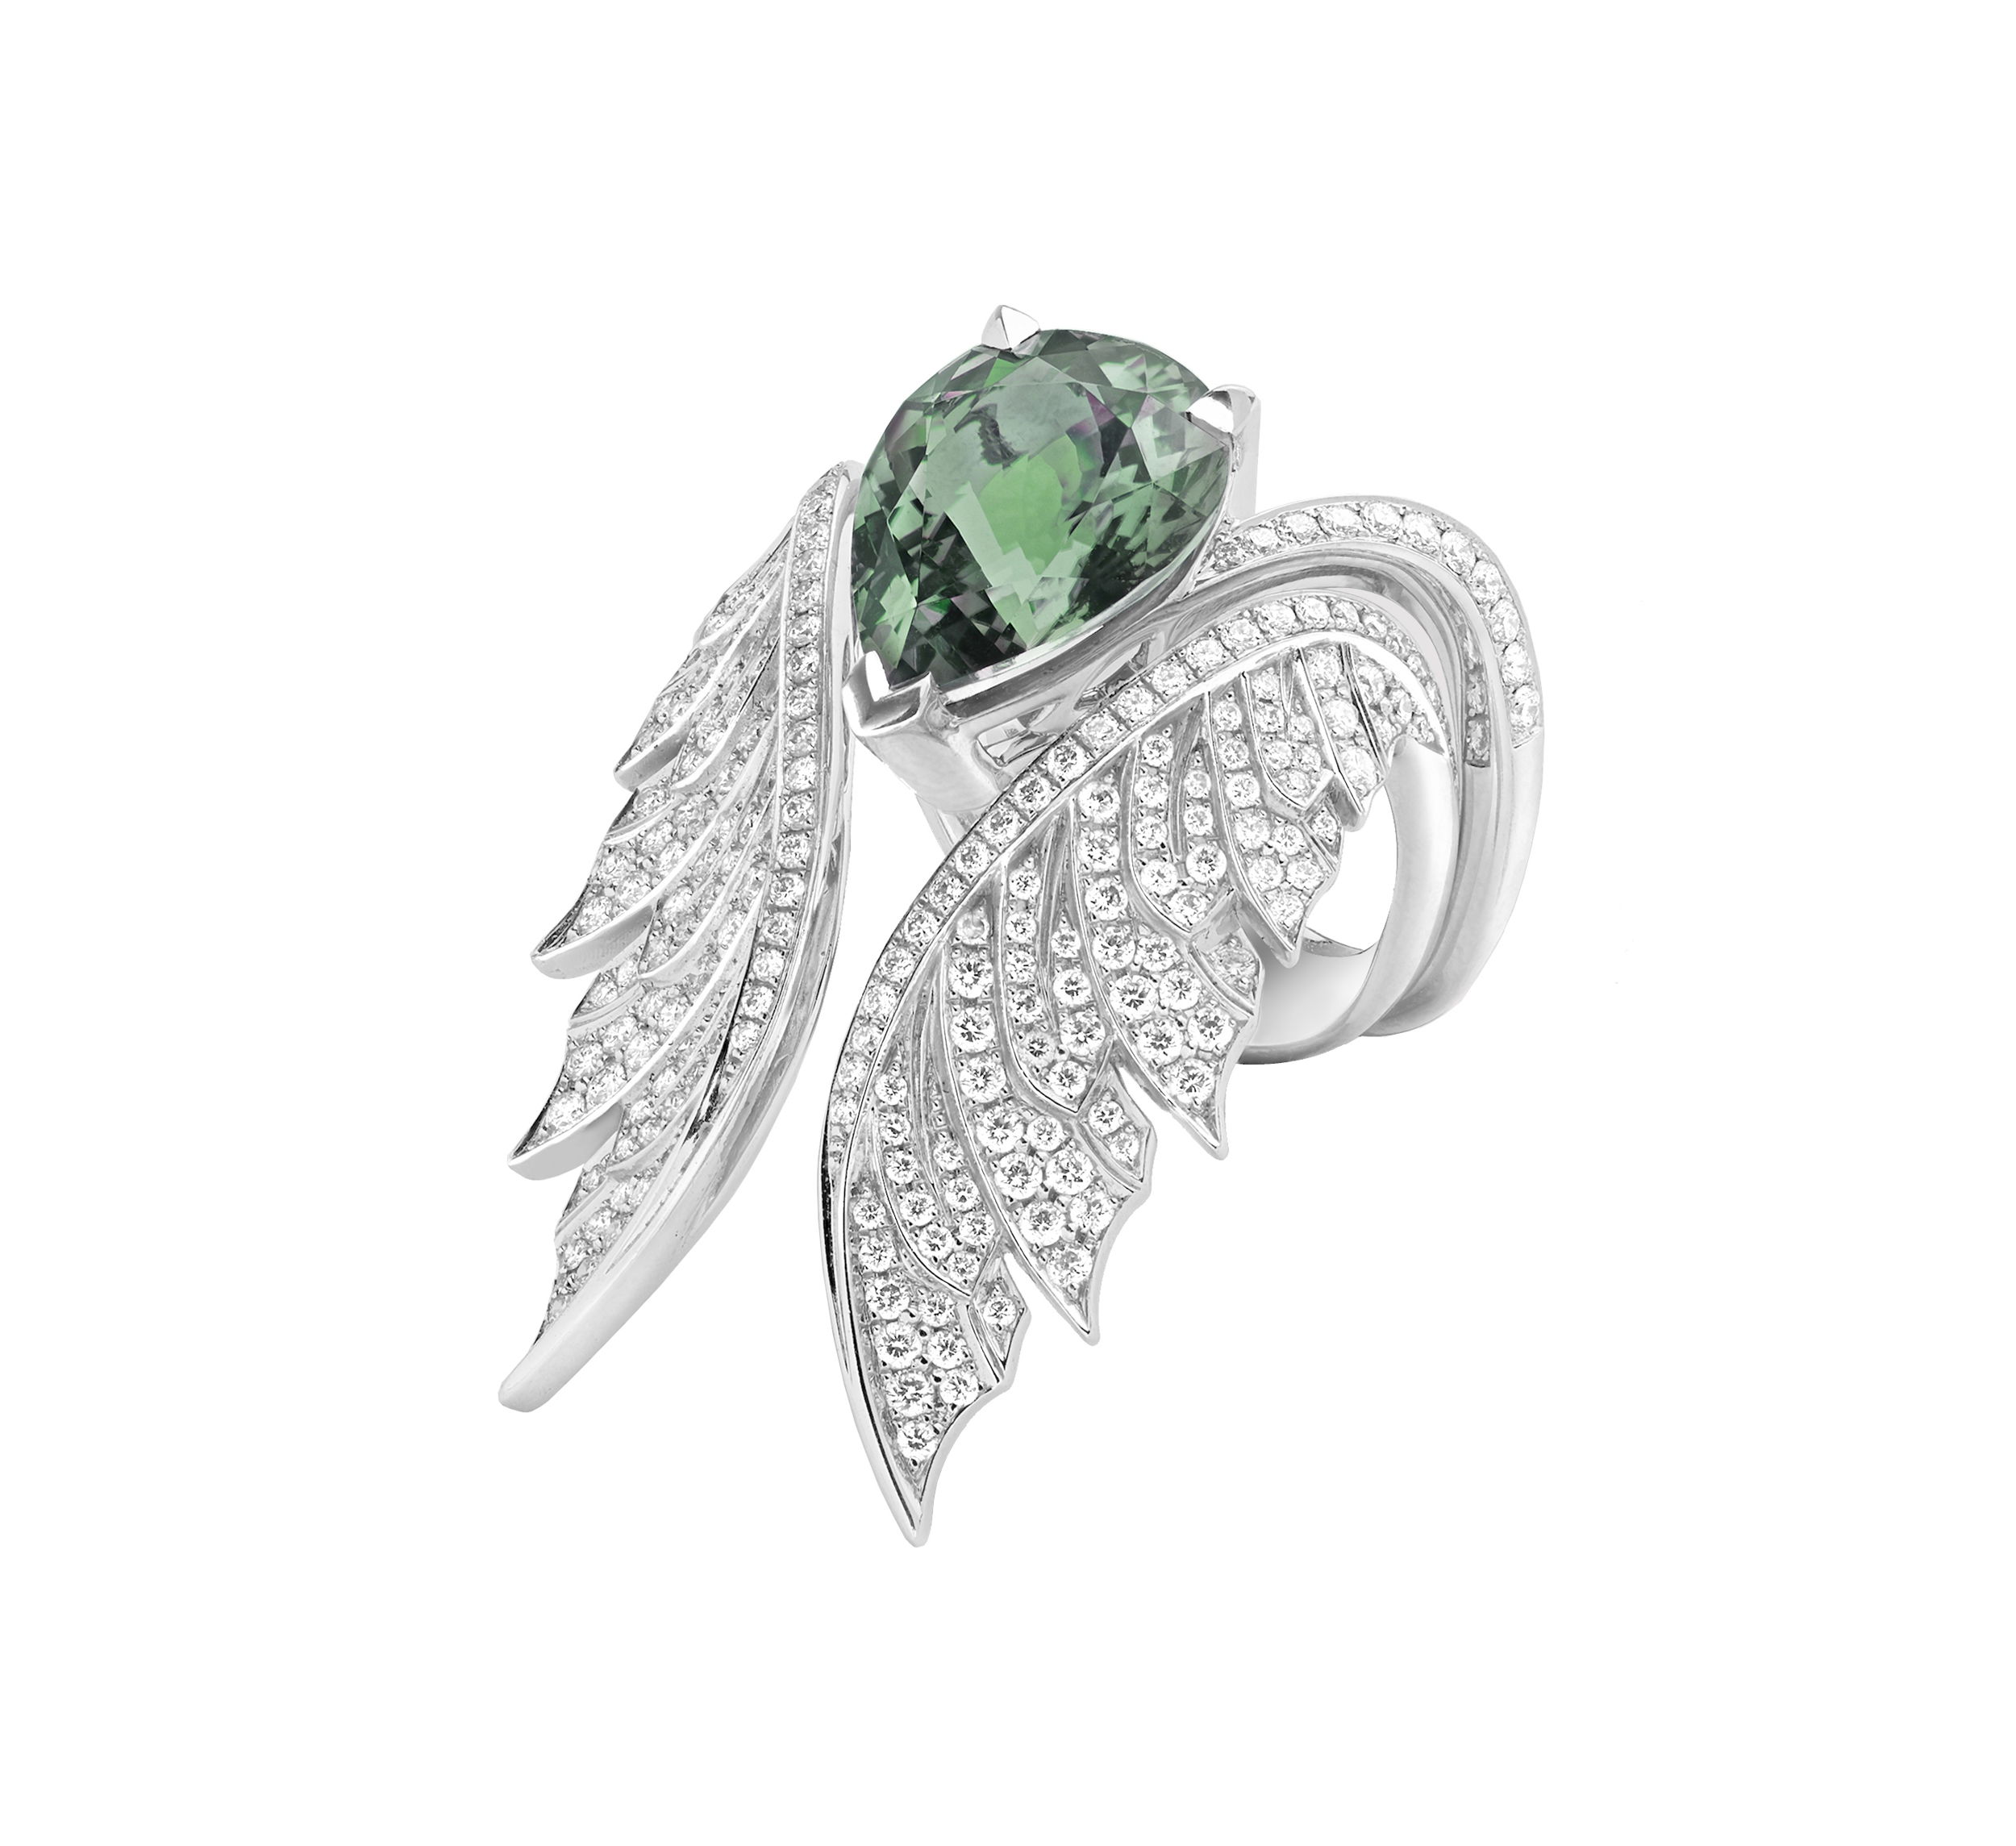 Magnipheasant Pear Inner Cocktail Ring with Grey Green Tourmaline in 18kt White Gold - Size 7